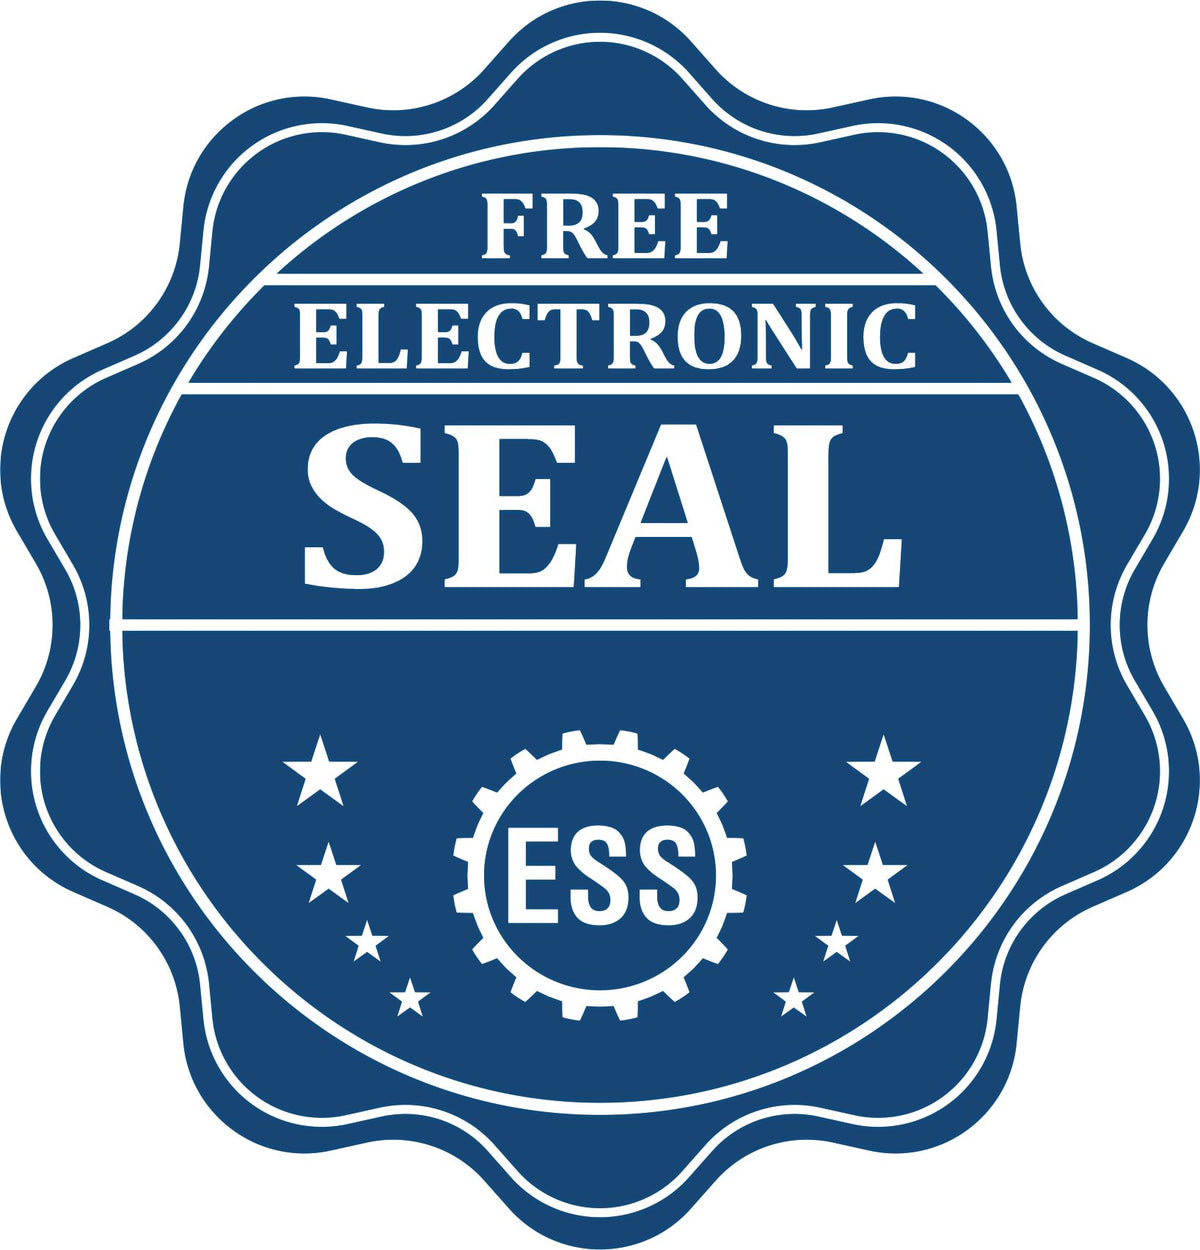 A badge showing a free electronic seal for the Premium MaxLight Pre-Inked Pennsylvania Geology Stamp with stars and the ESS gear on the emblem.